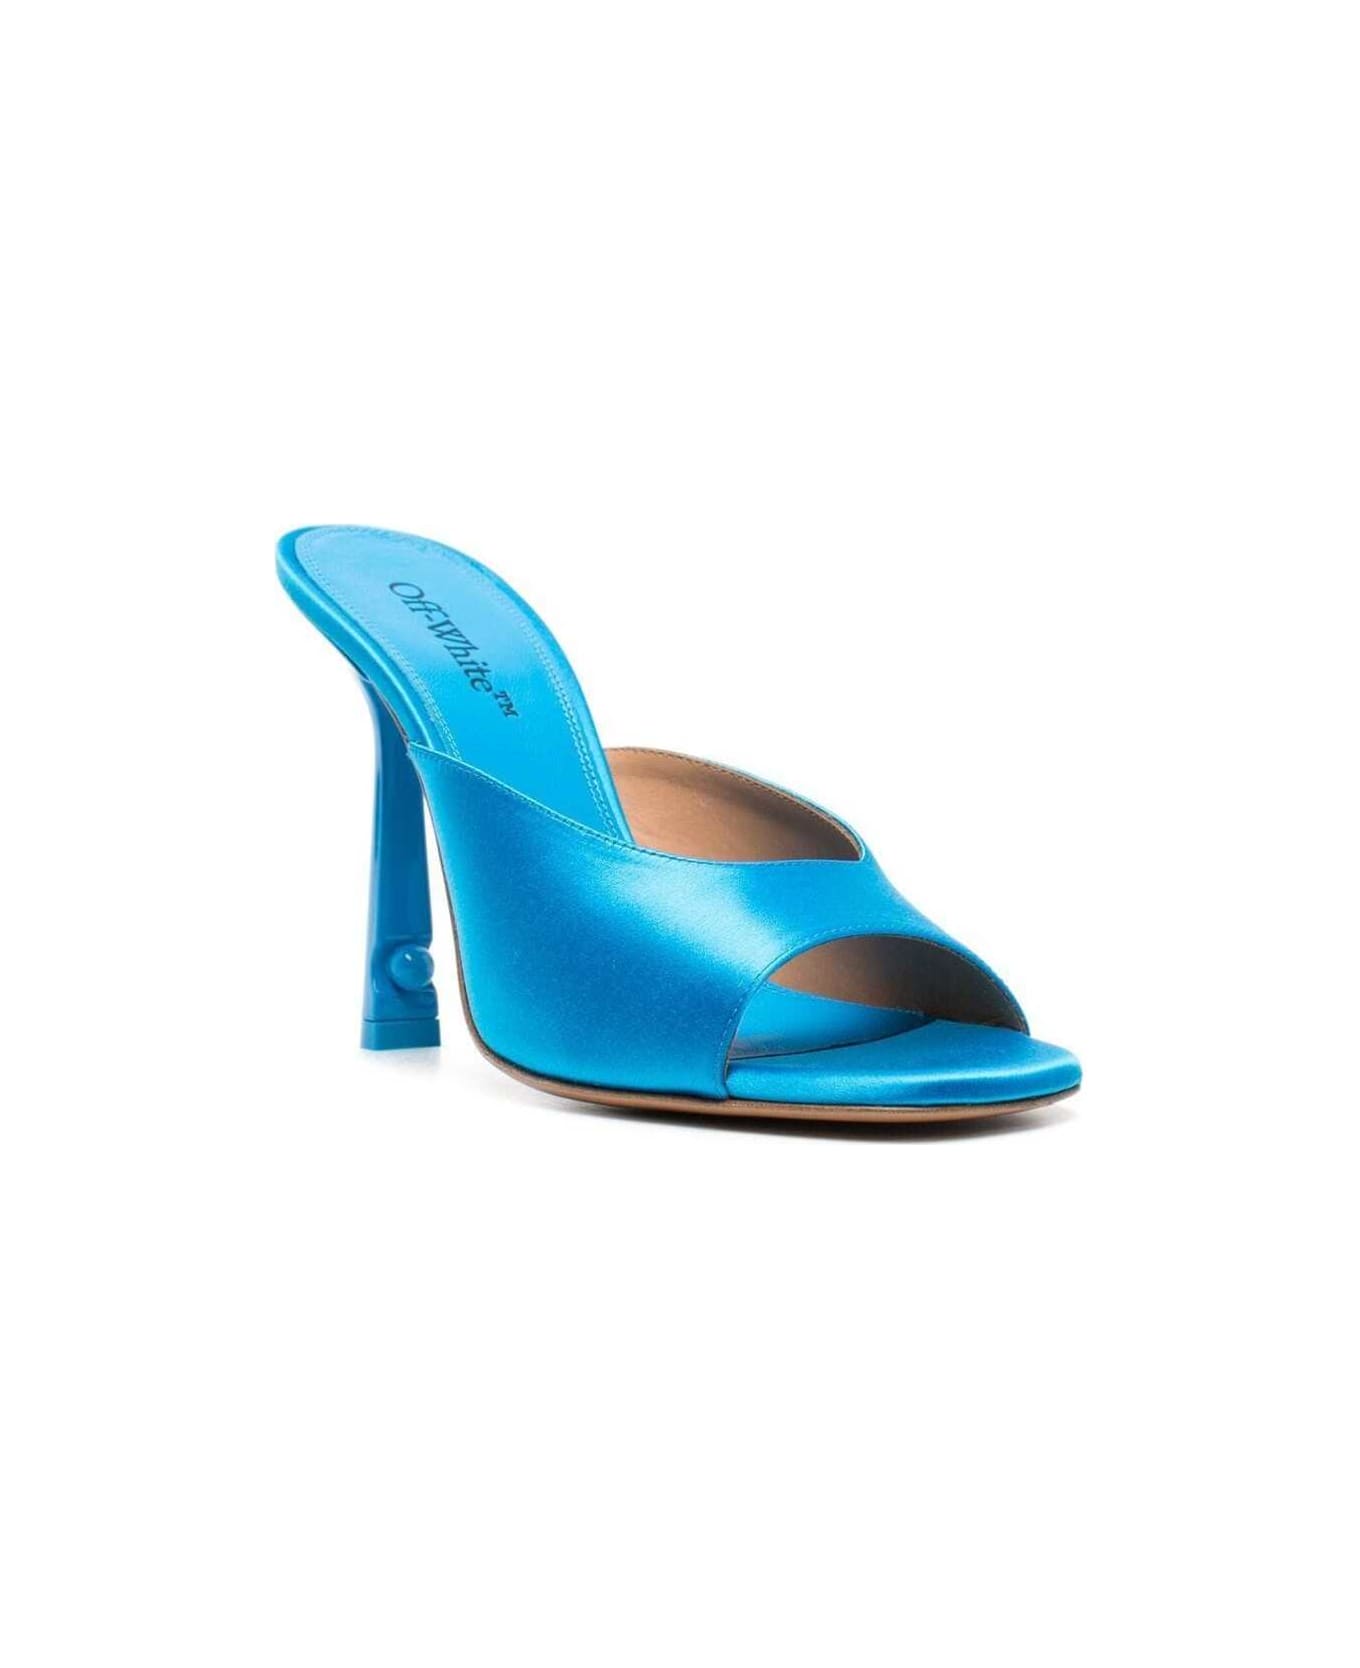 Off-White Pop Lollipop Pointed-toe Mules In Light-.blue Leather Woman - Light blue